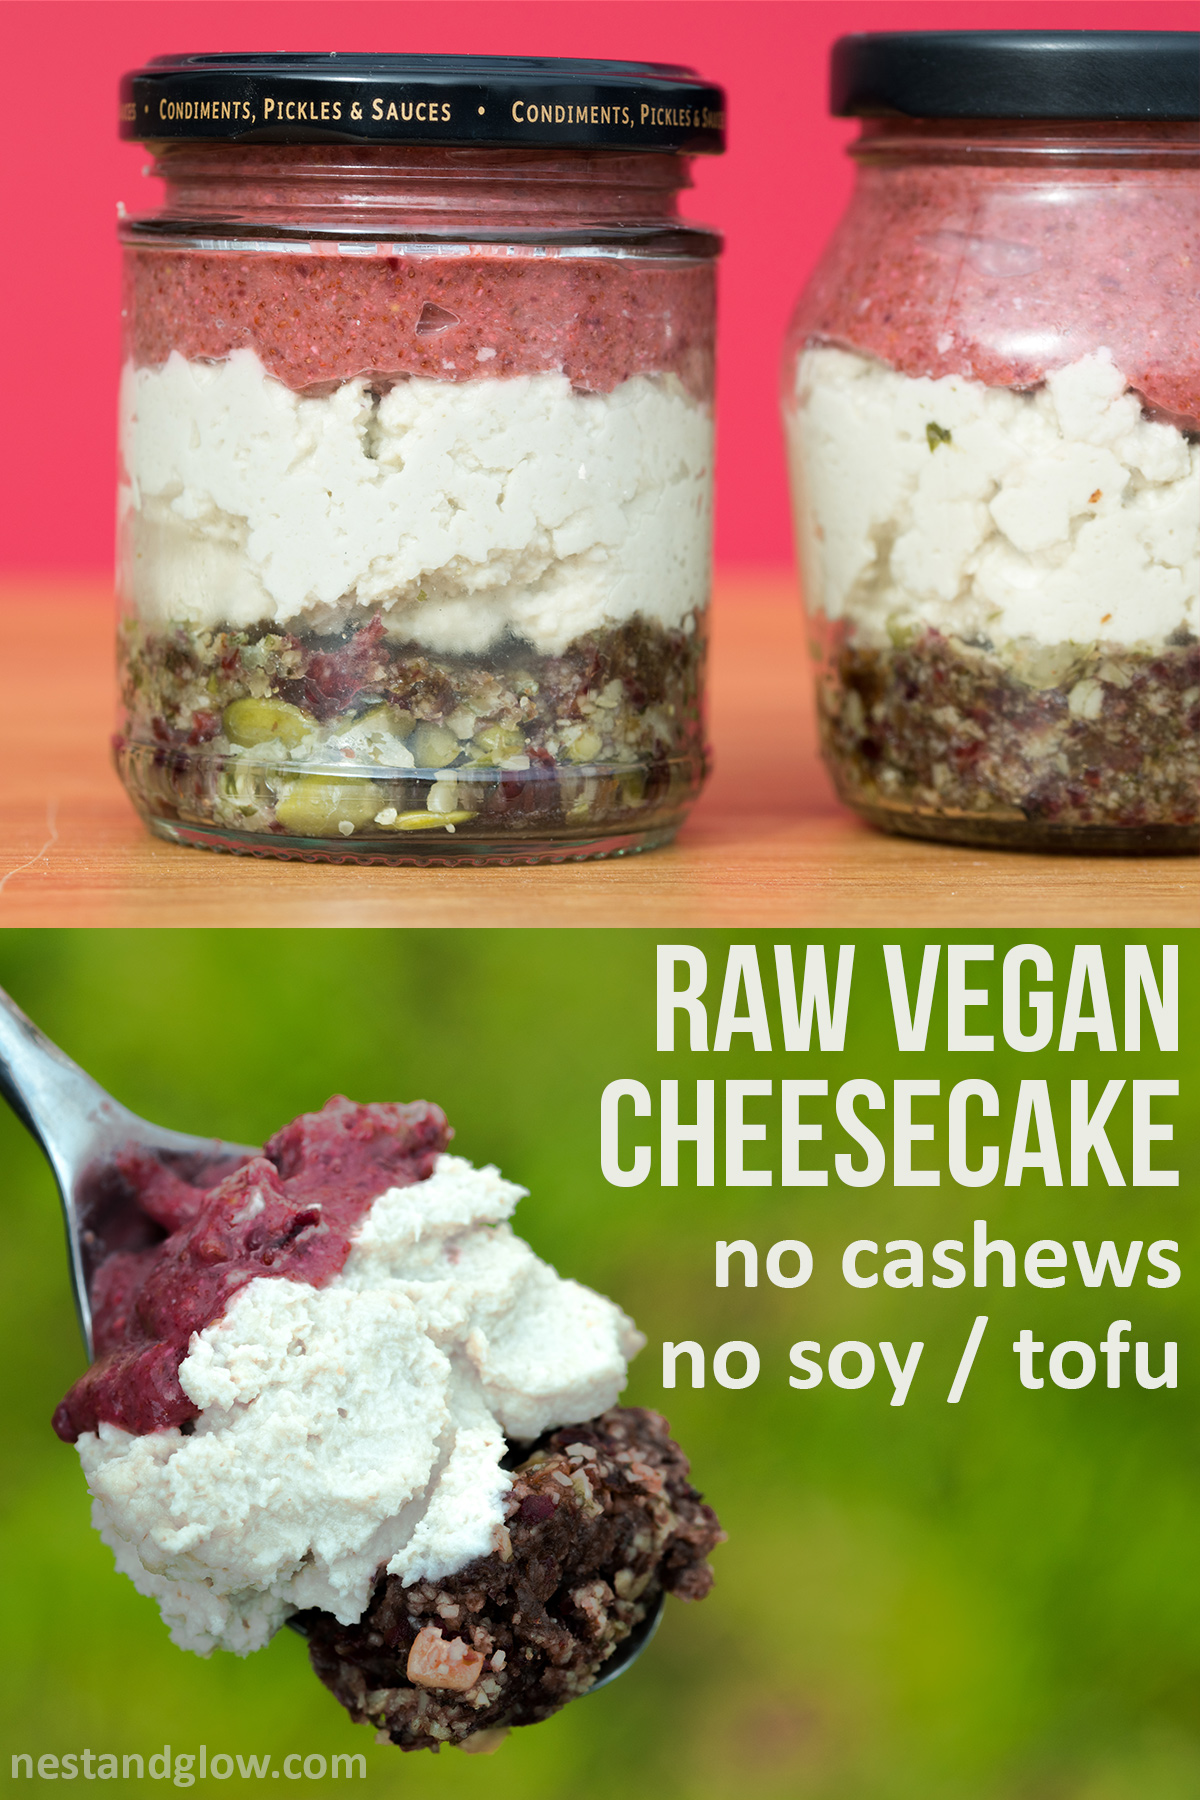 Vegan Cheesecake No Cashews Berries And Seeds Soy Nut Free,Passion Flower Vine Leaf